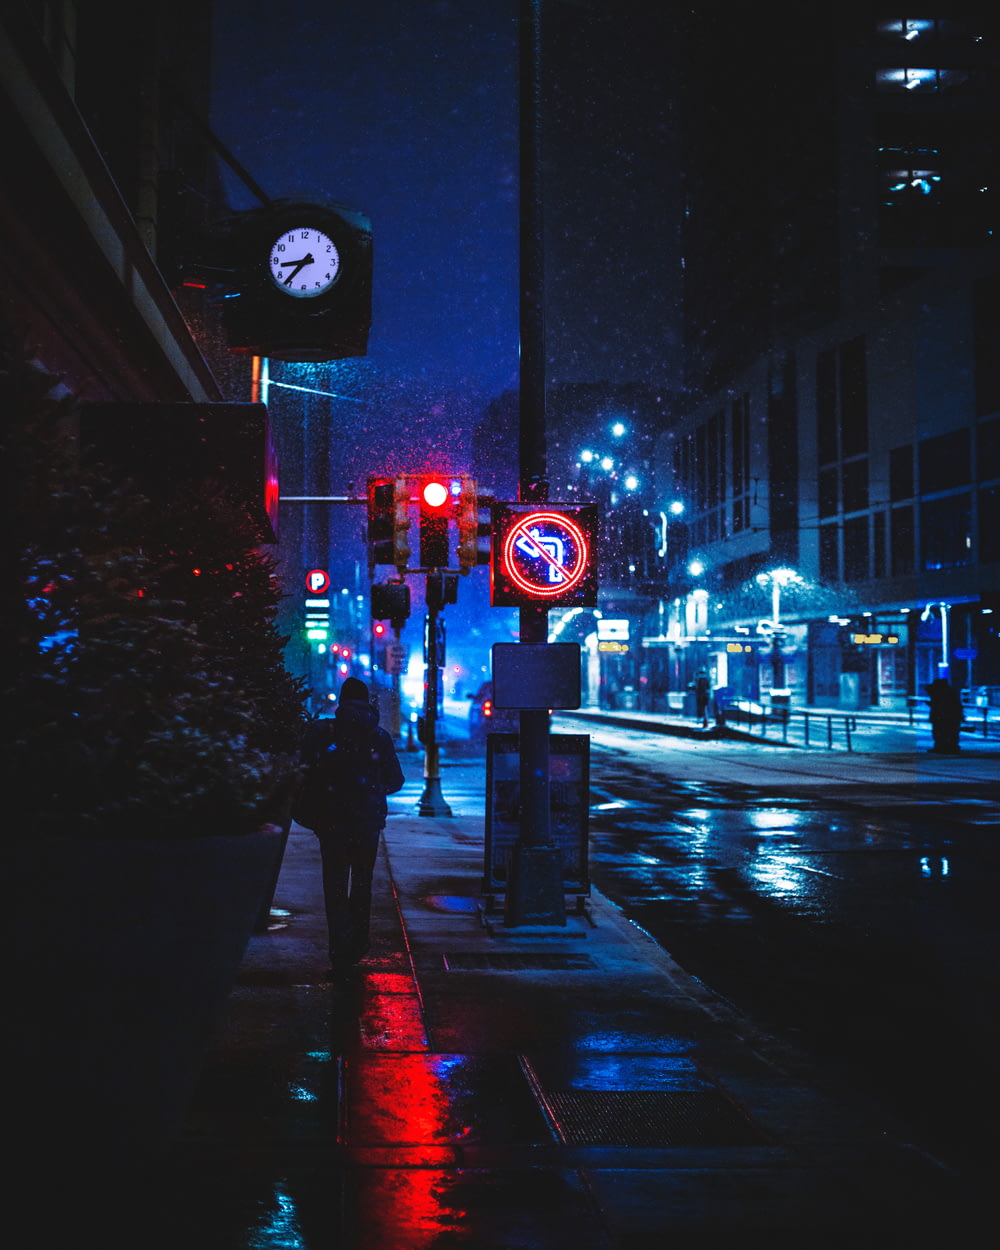 red and white traffic light on the street during night time